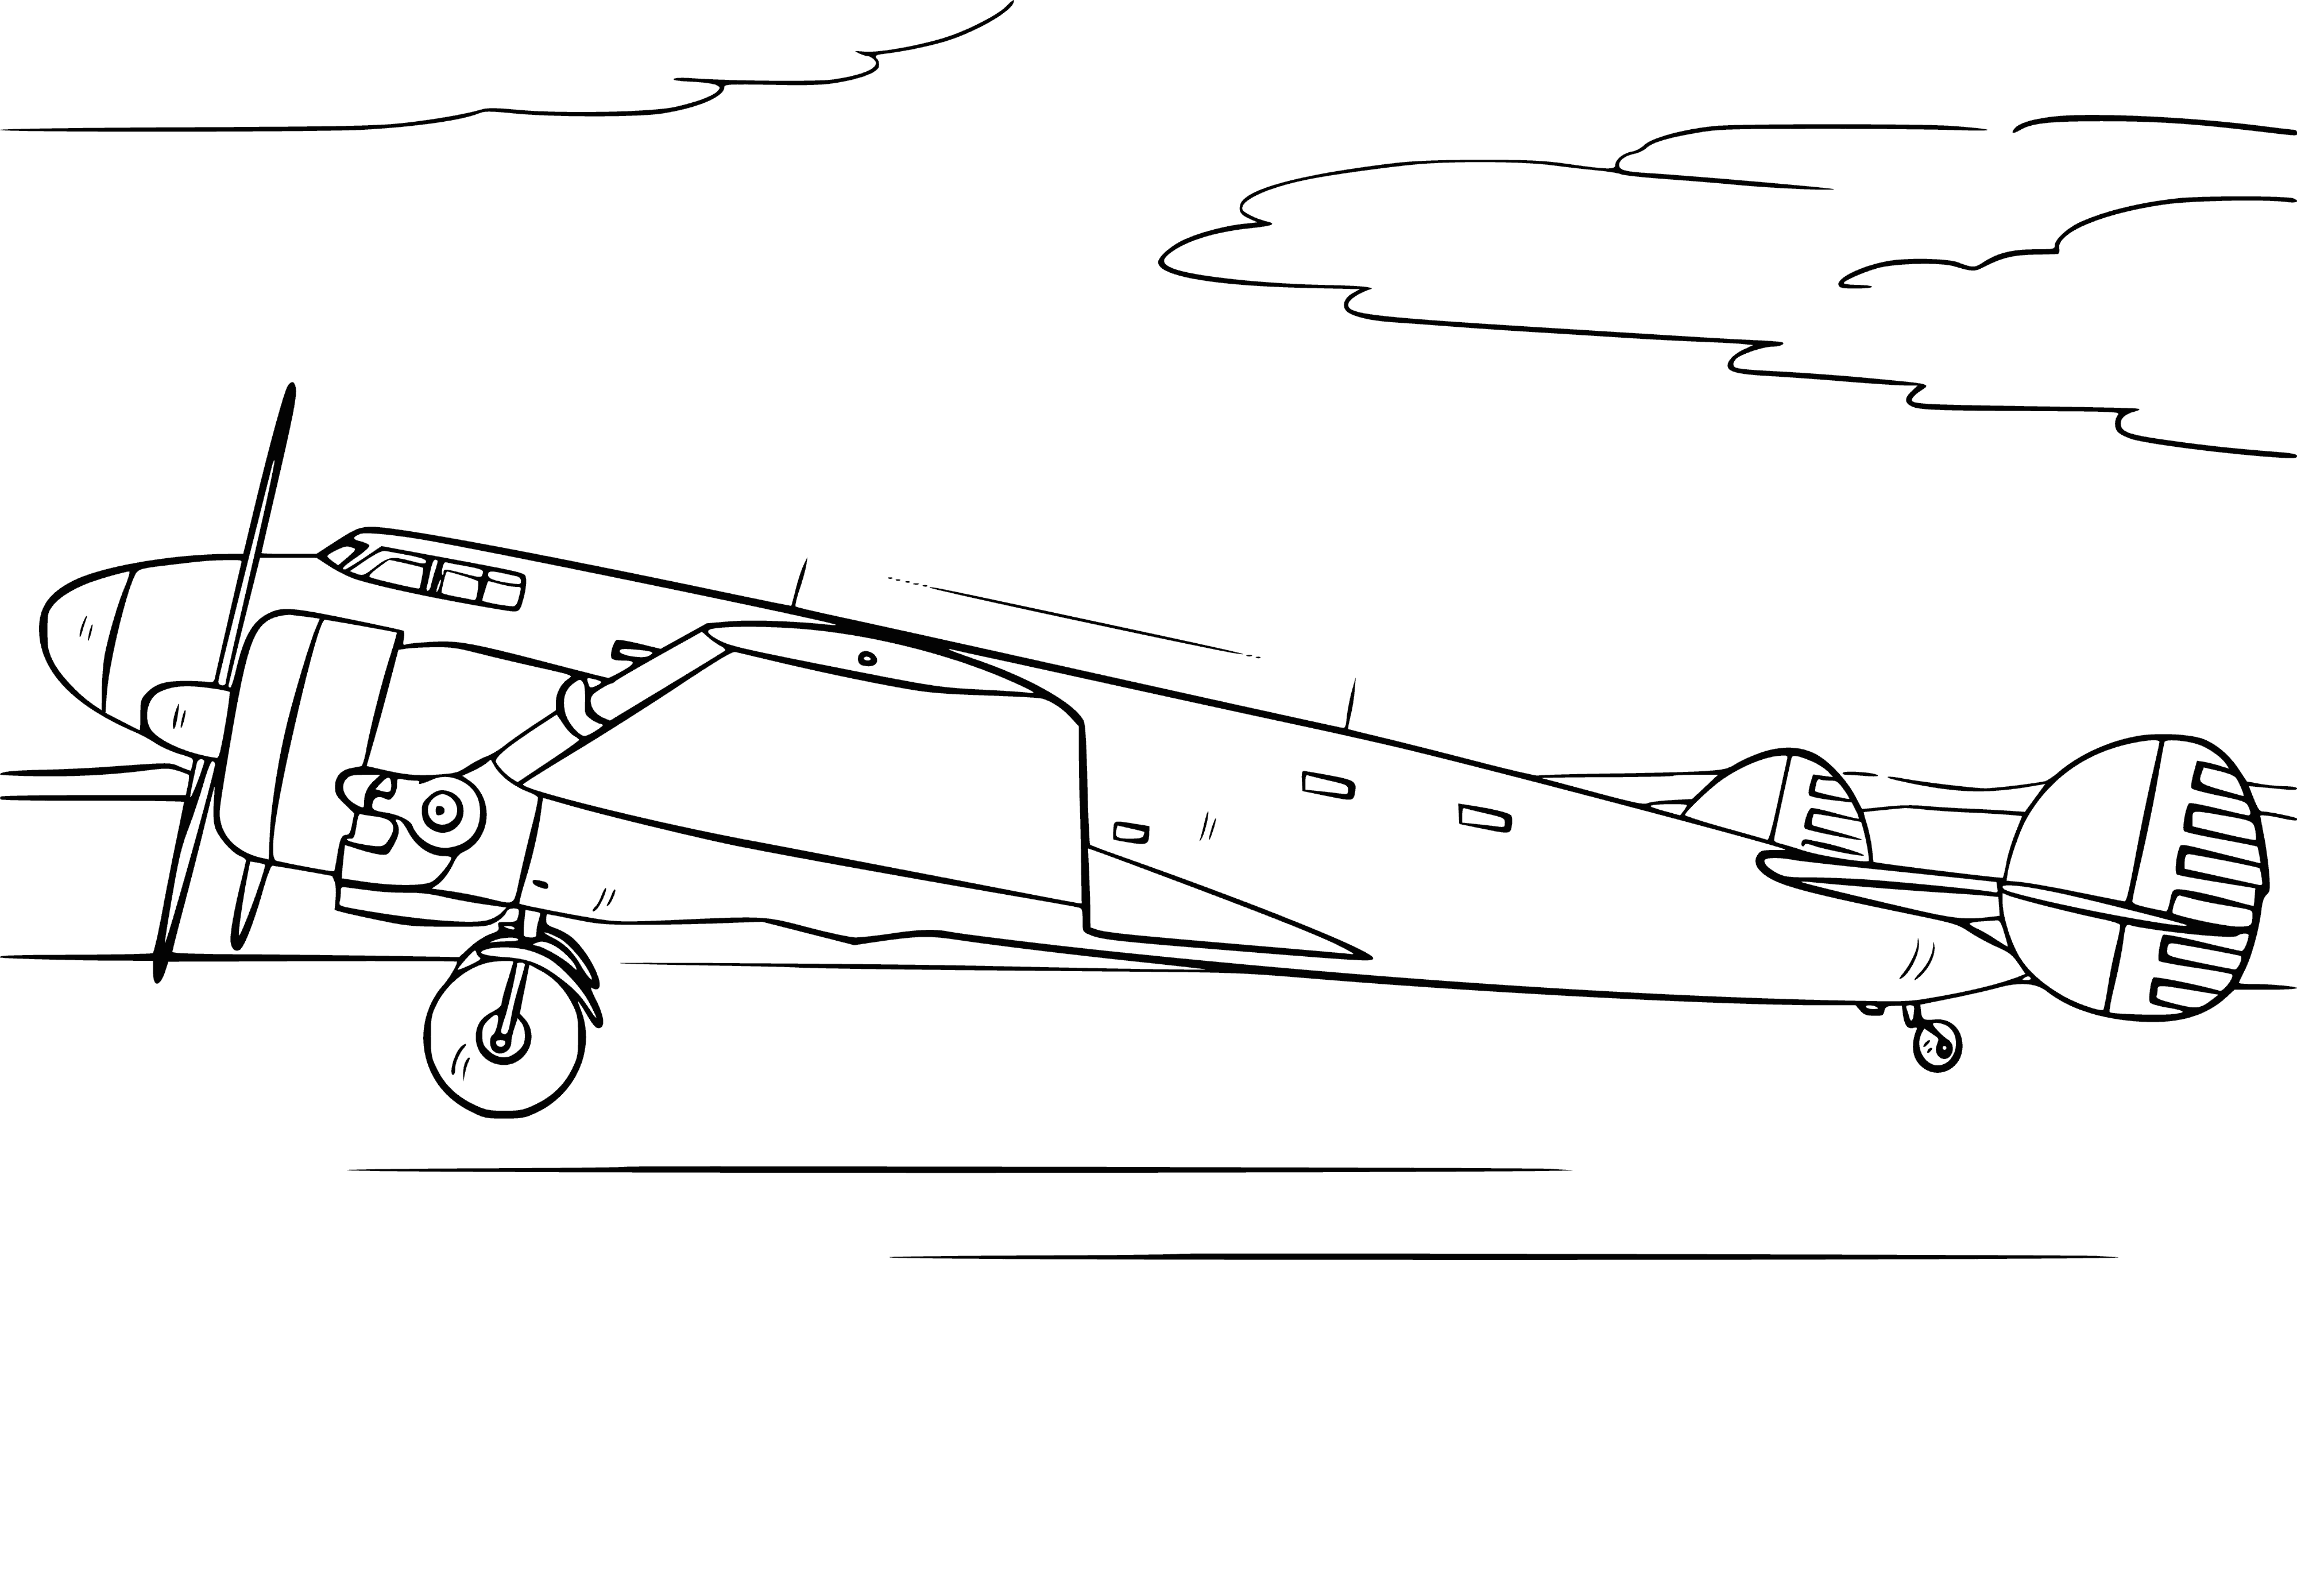 Airplane taking off coloring page